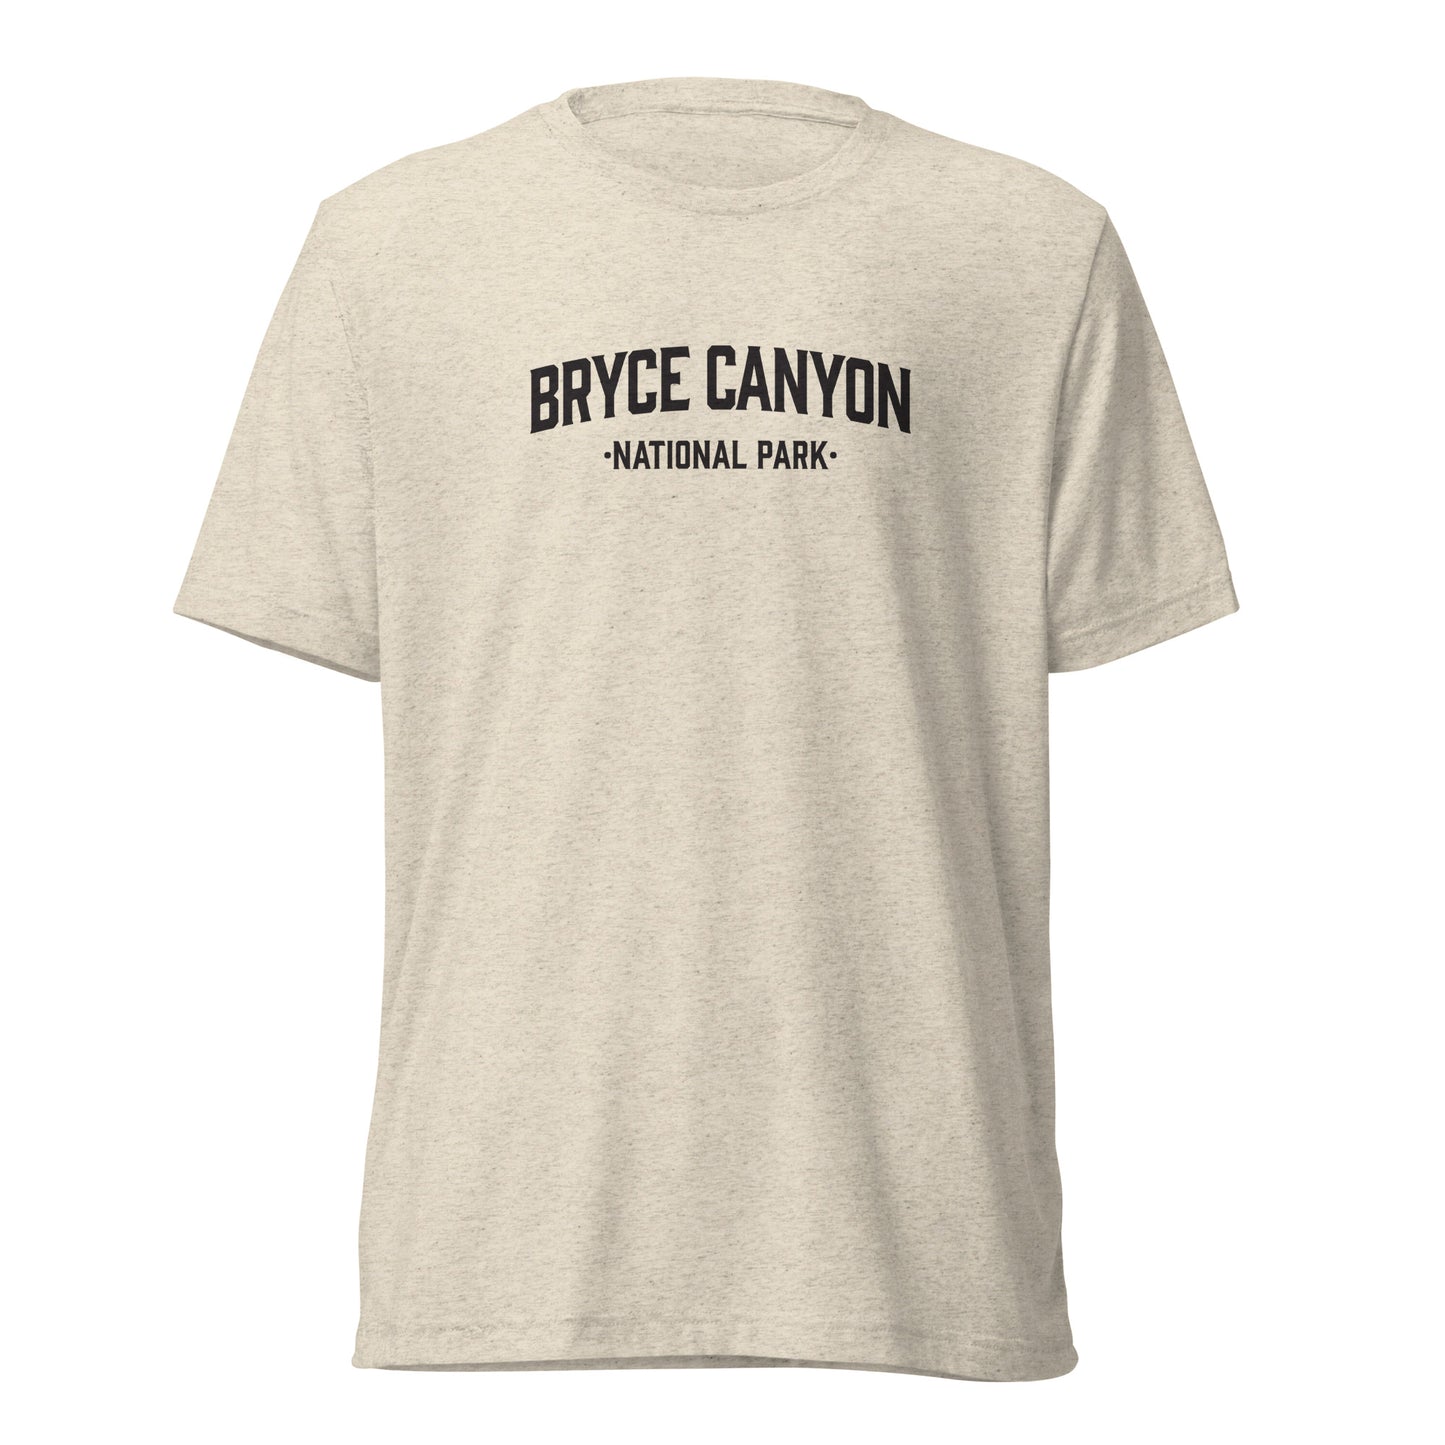 Premium Everyday Bryce Canyon National Park Tee